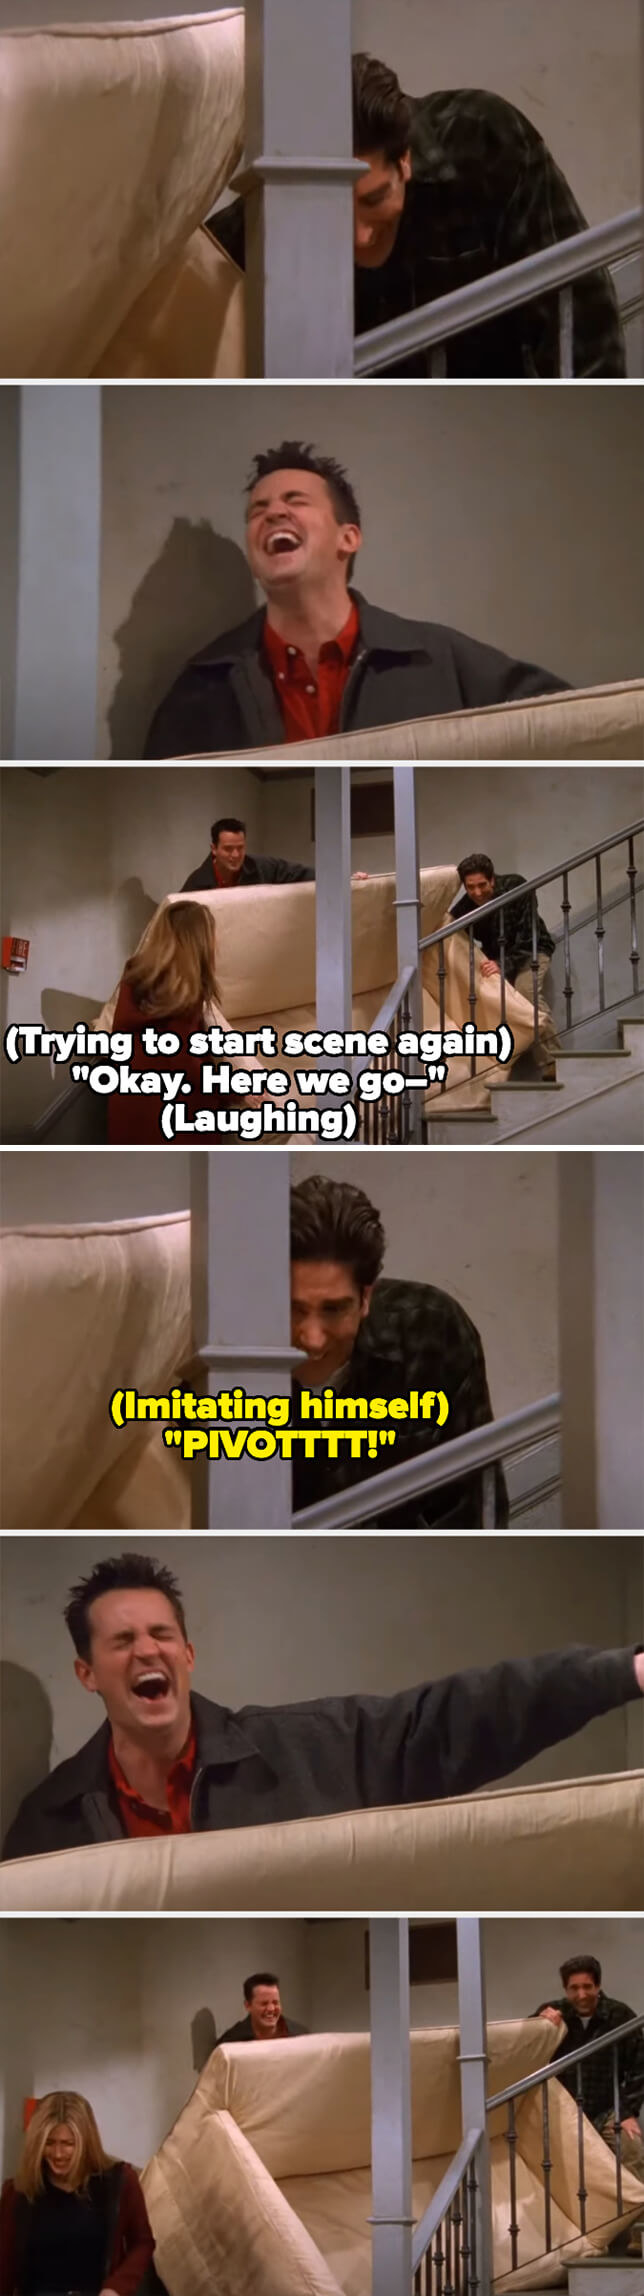 David, Matthew Perry, and Jennifer Aniston cracking up on the stairs